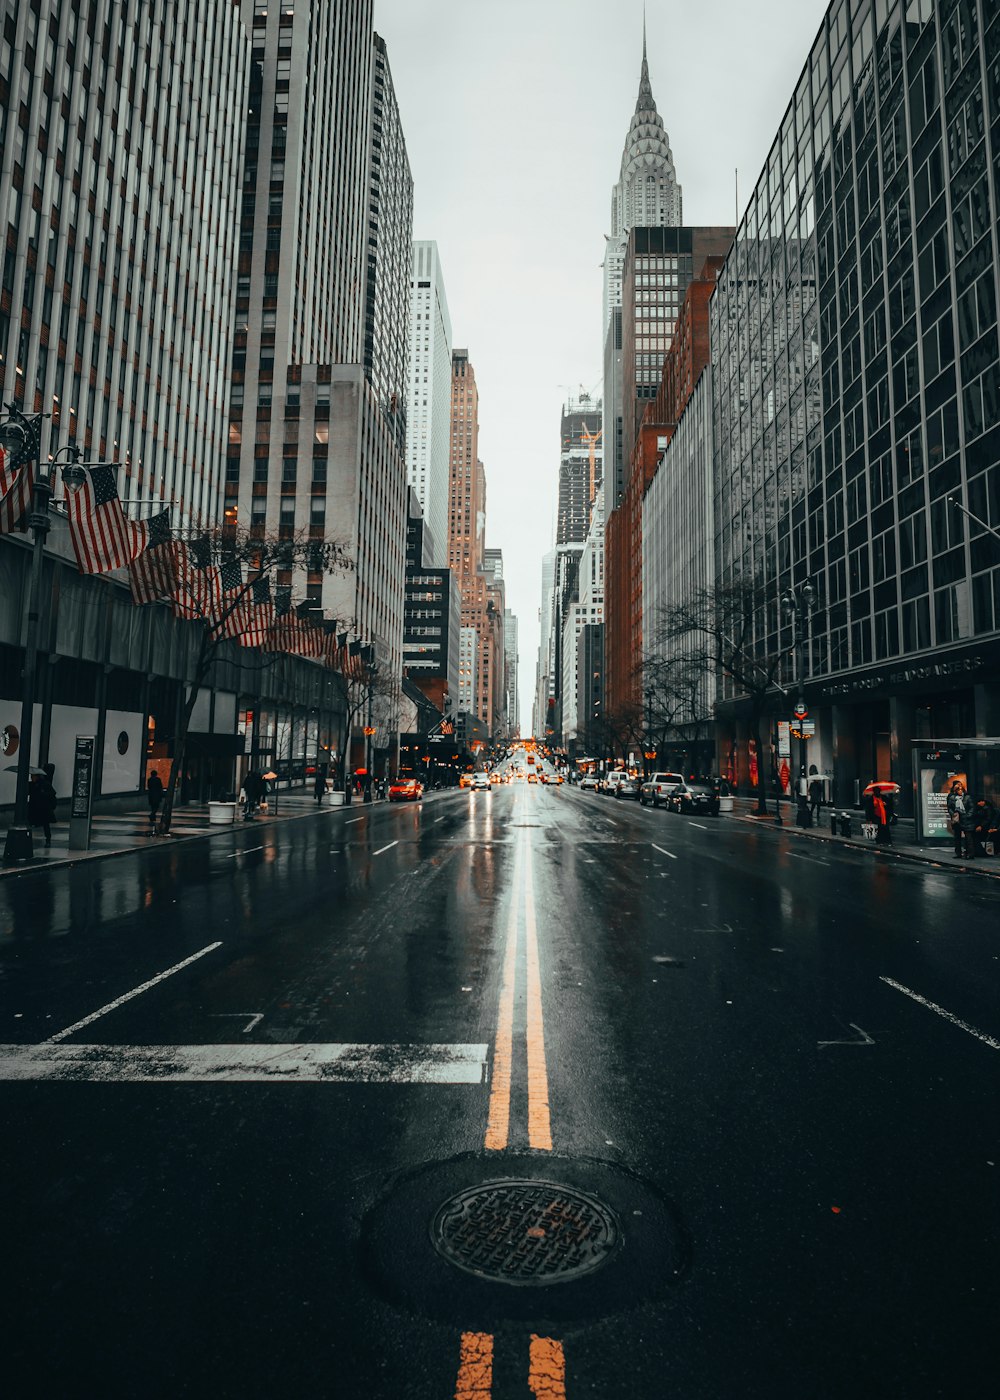 100+ Street Pictures | Download Free Images on Unsplash